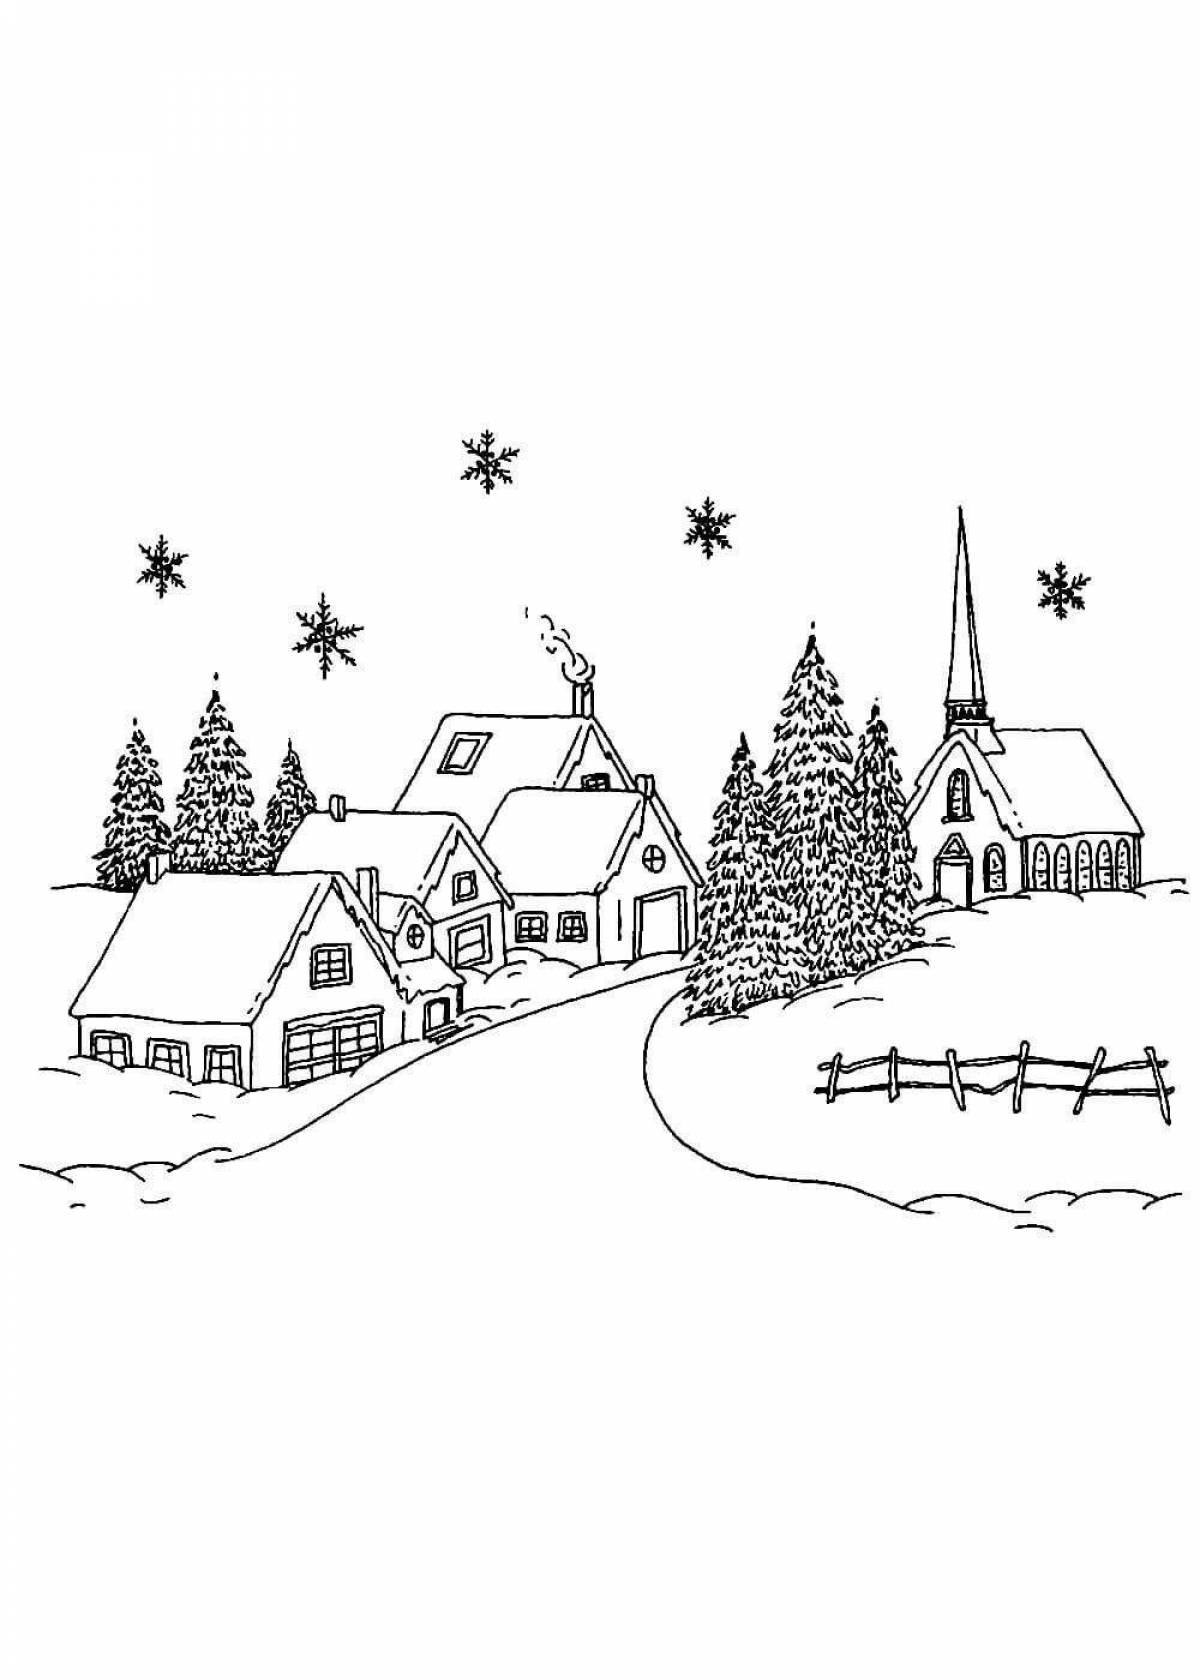 Coloring for a beautiful winter landscape